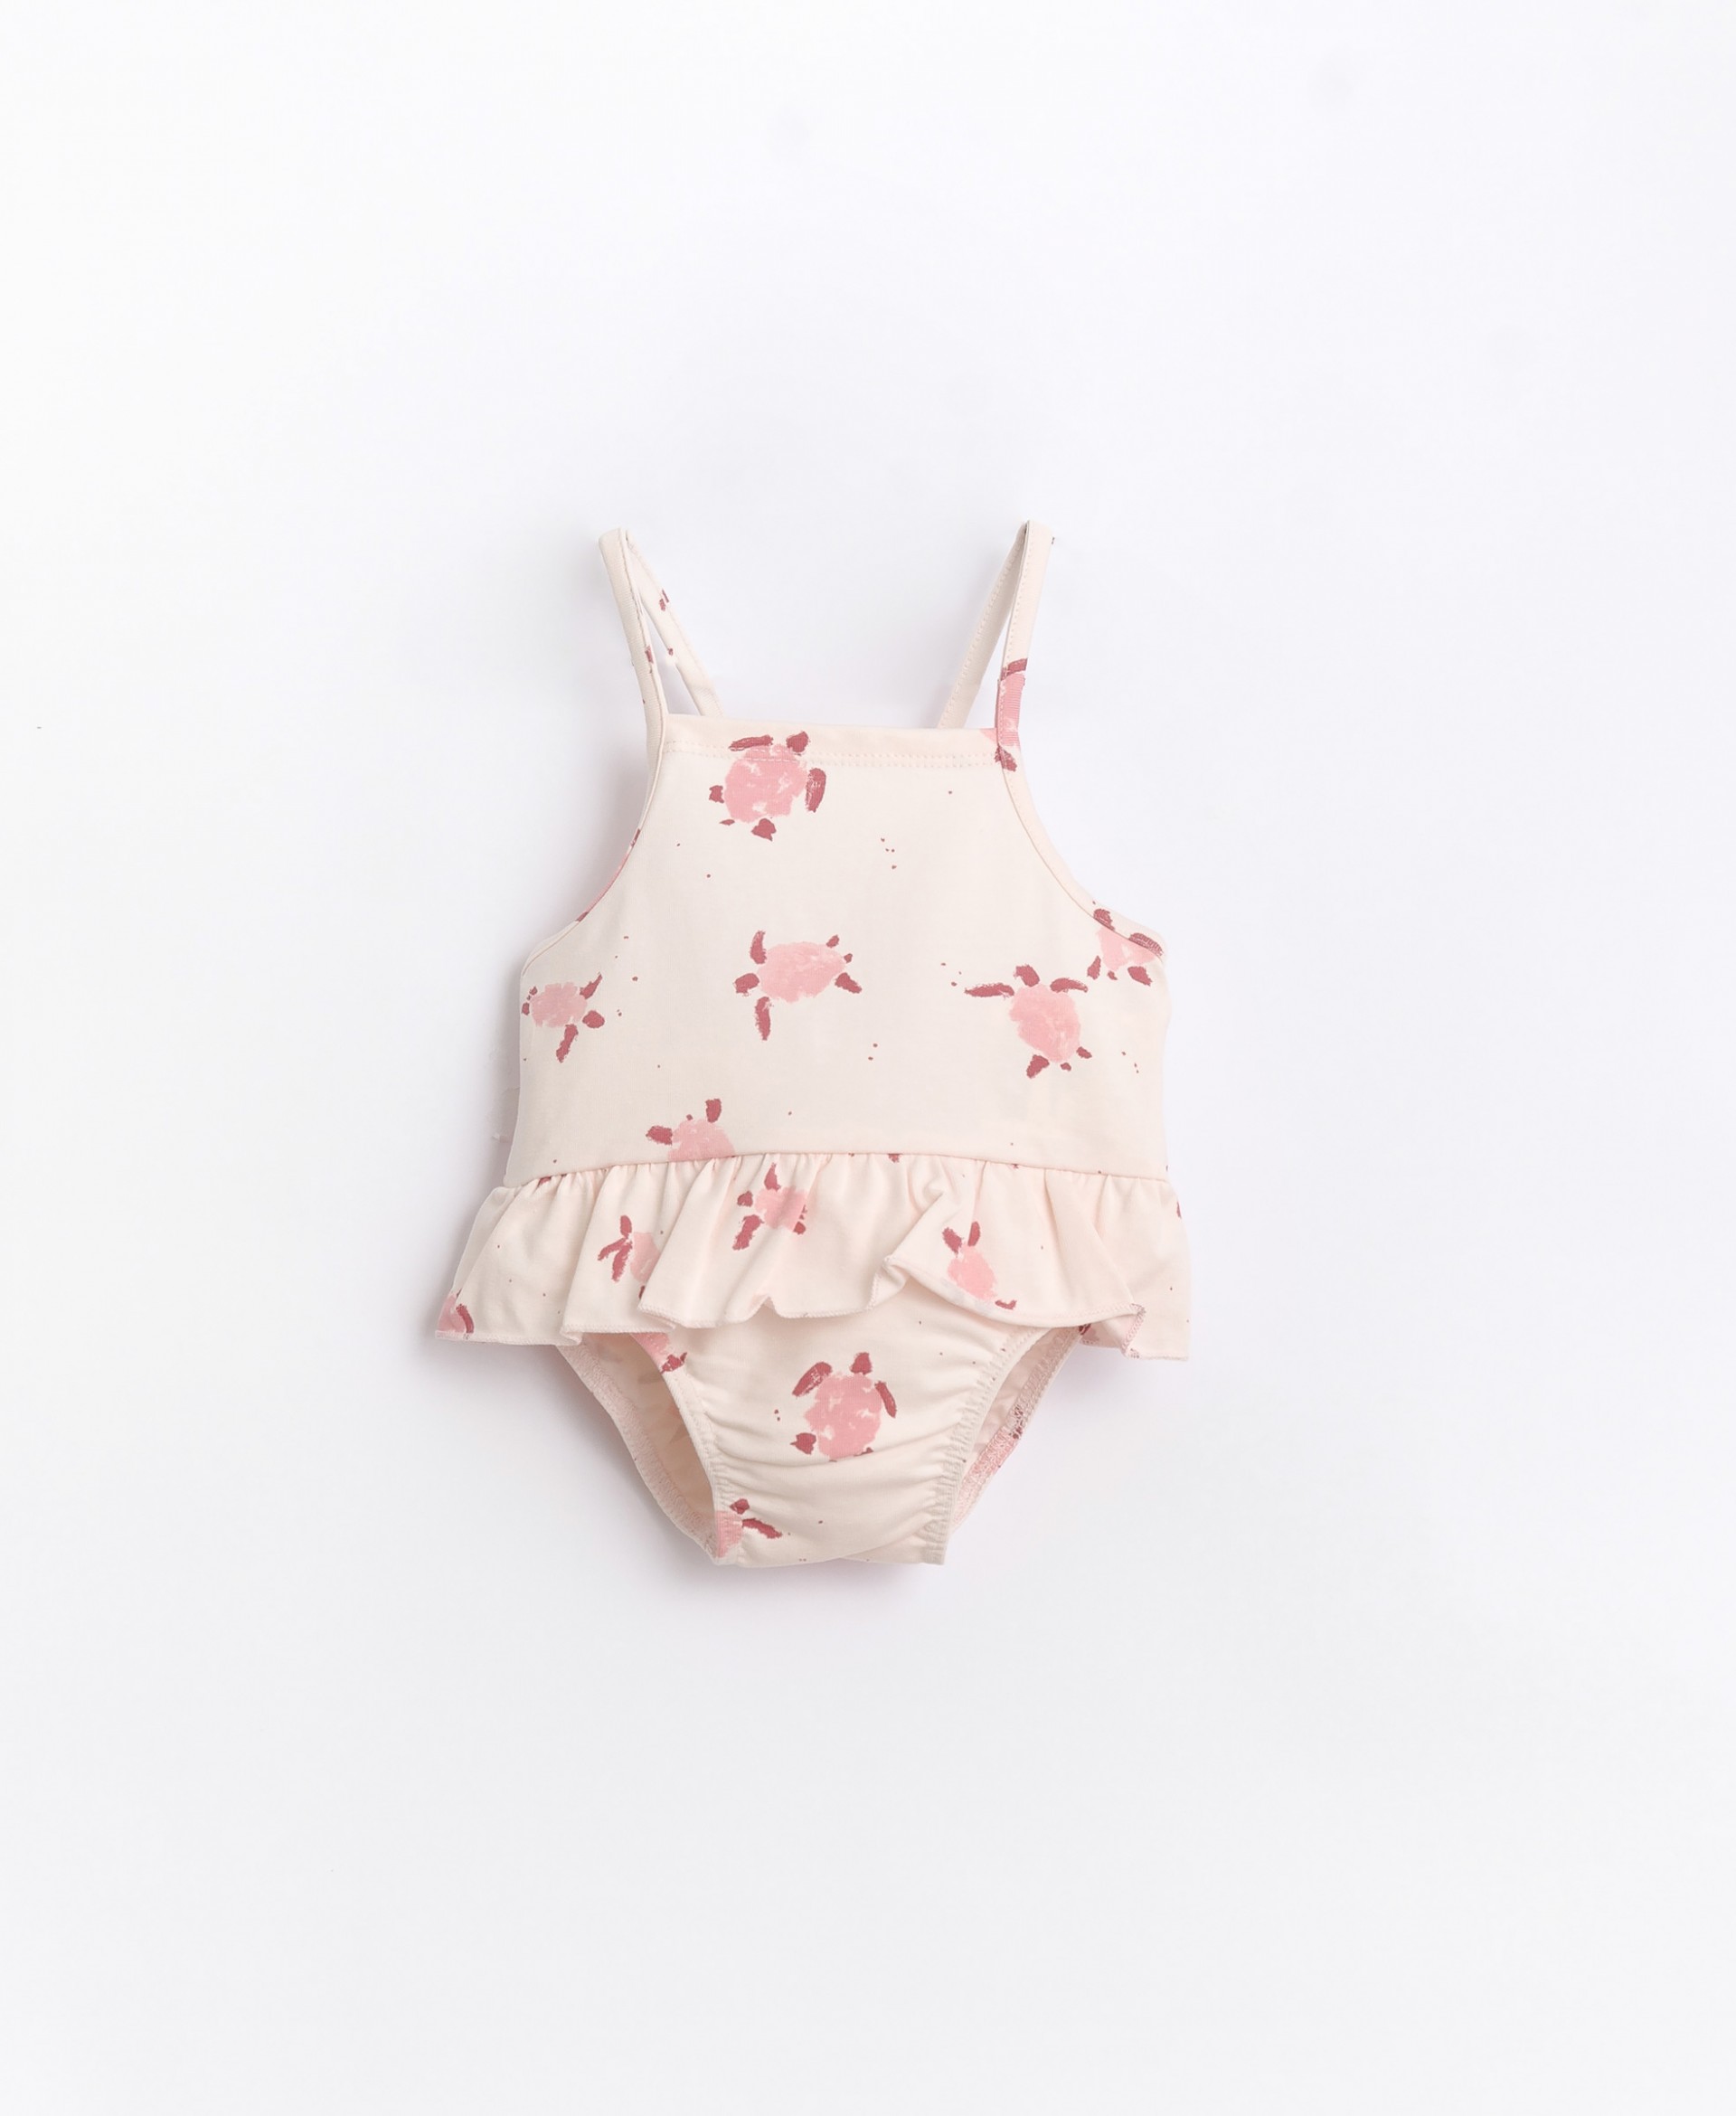 Bathing suit in organic cotton | Basketry